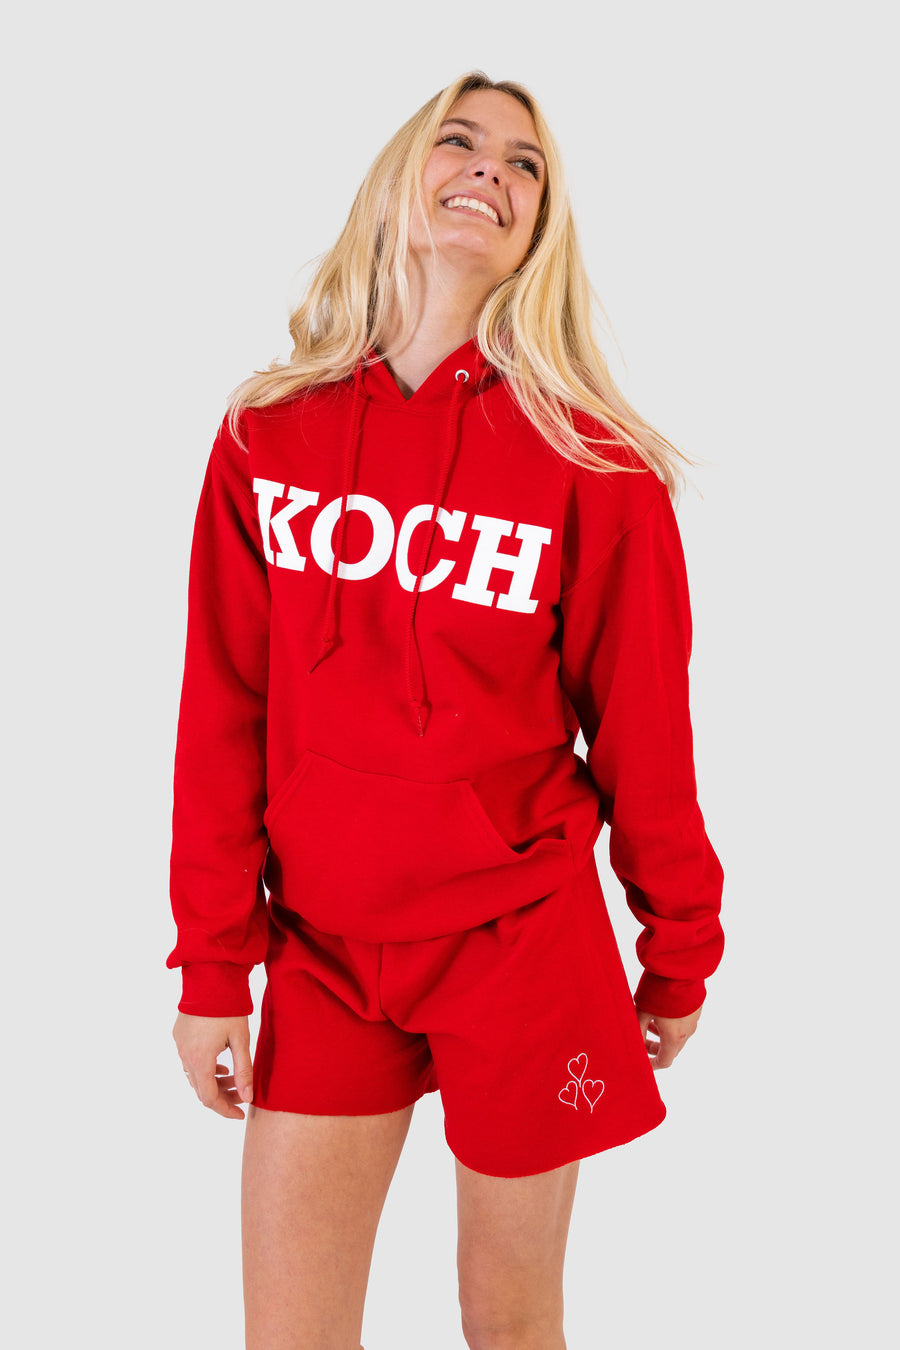 KOCH SWEAT SET IN RED *LIMITED*EDITION*